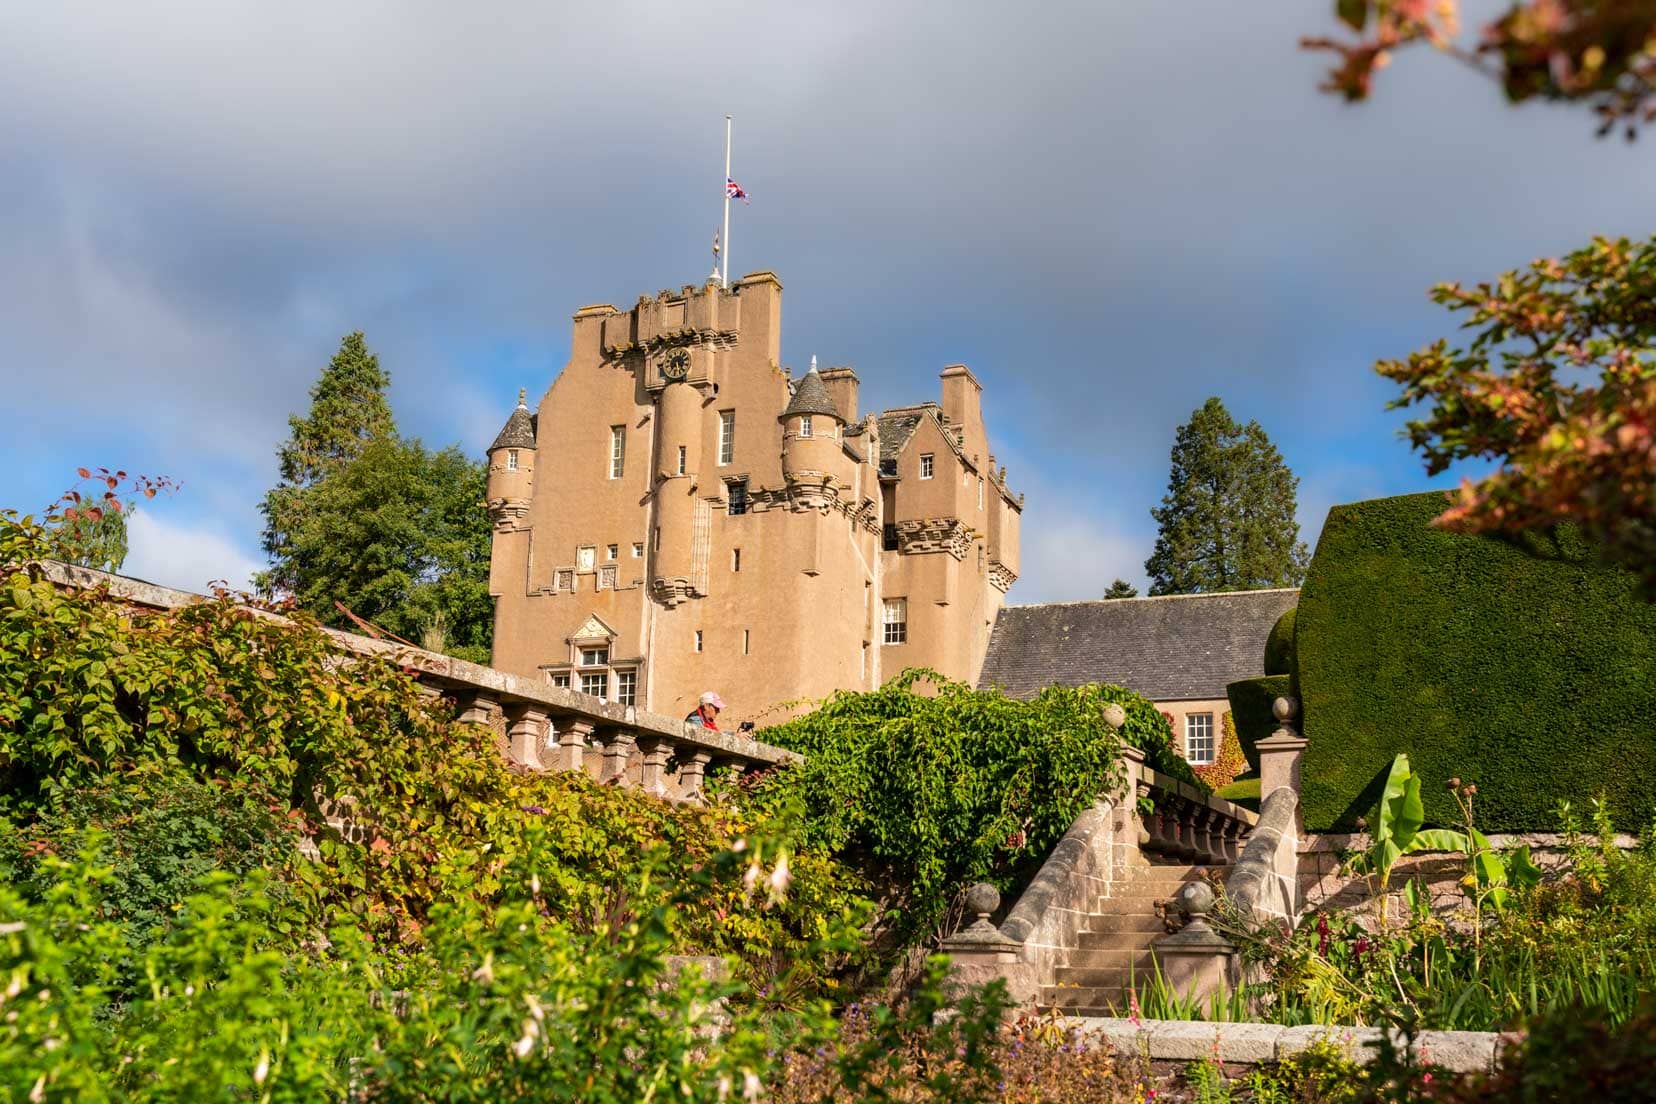 Crathes-Castle seen from the gardens